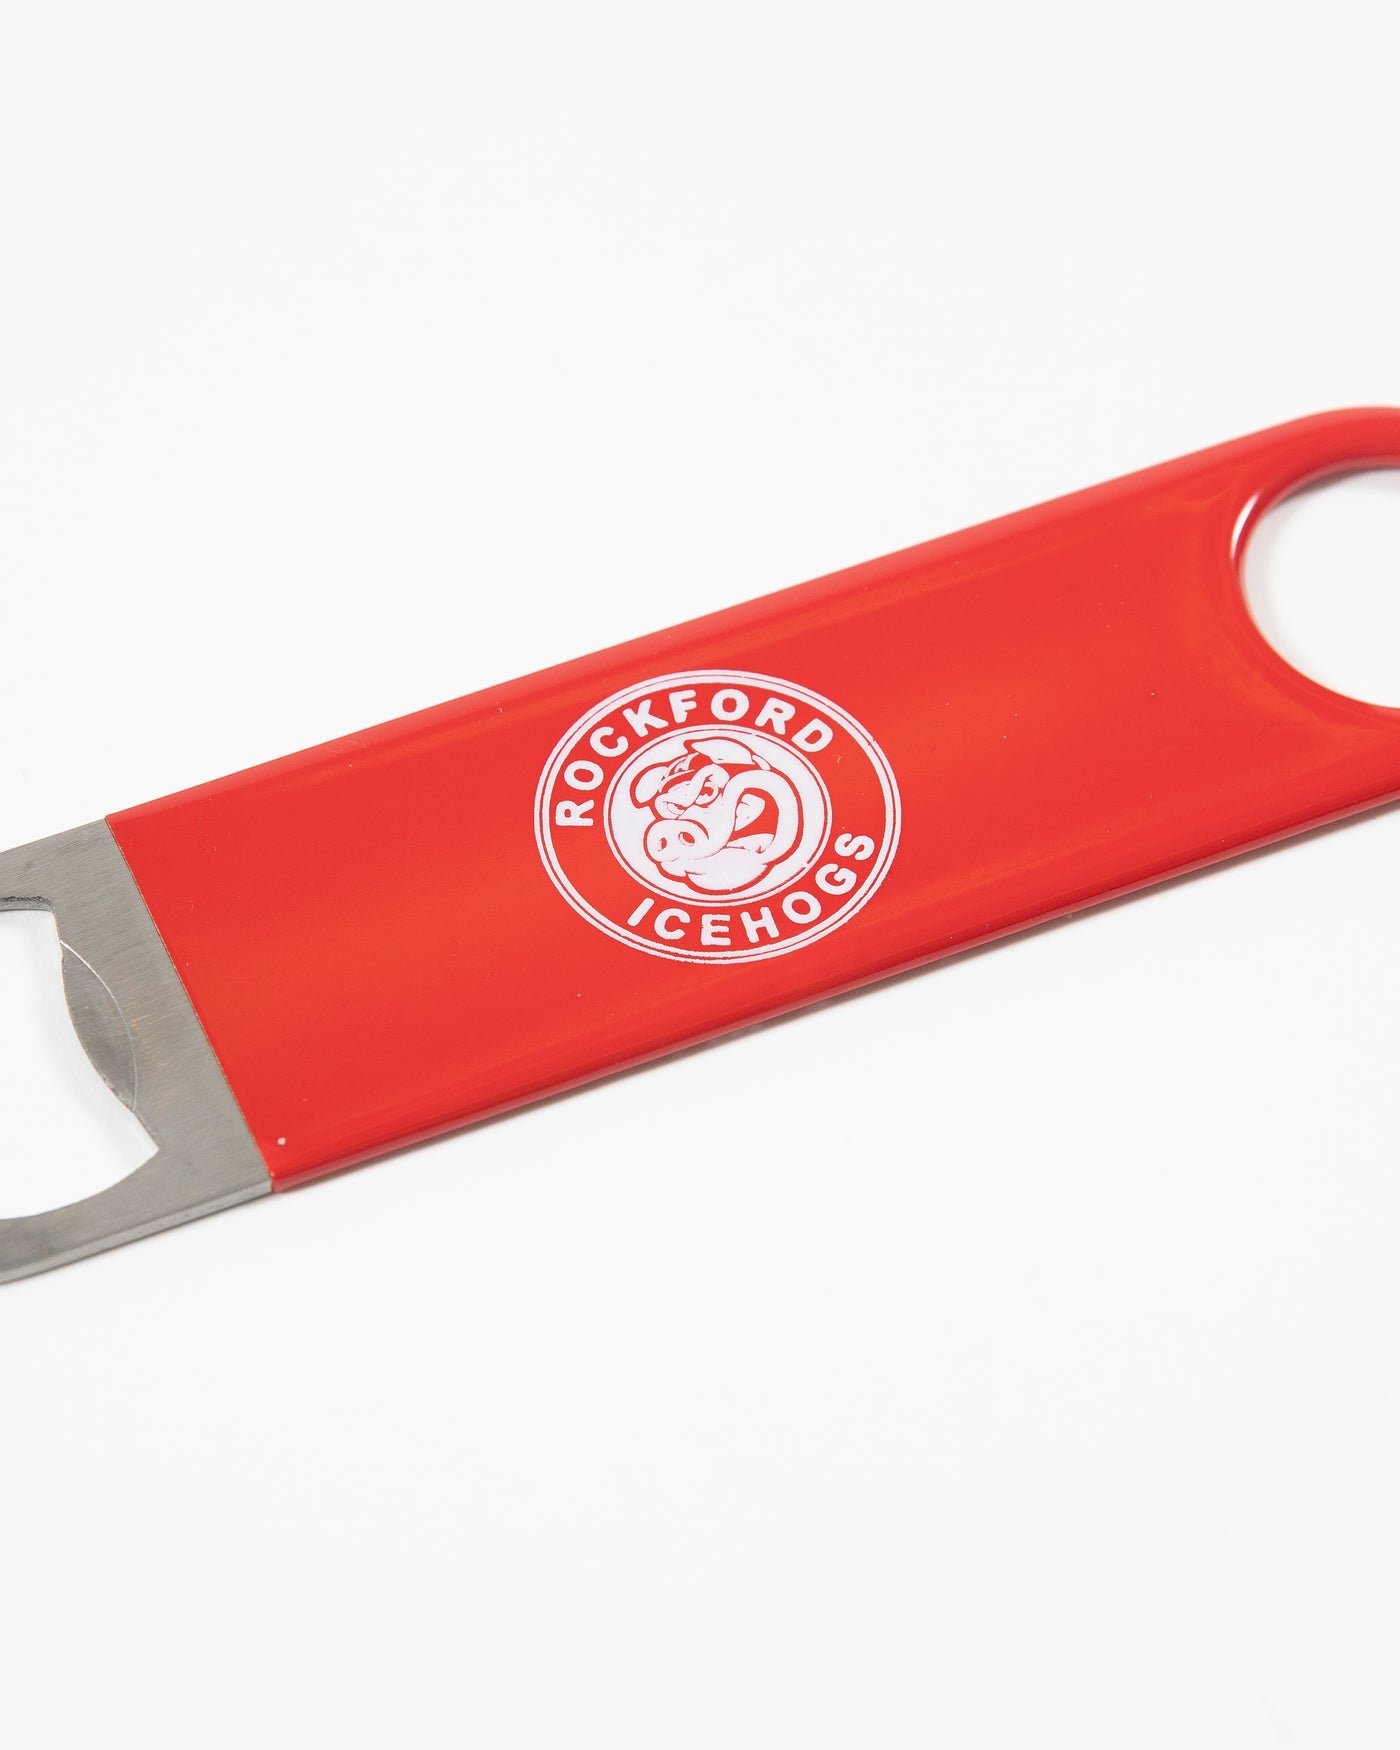 Red Rockford IceHogs metal bottle opener with logo on front - detail flat